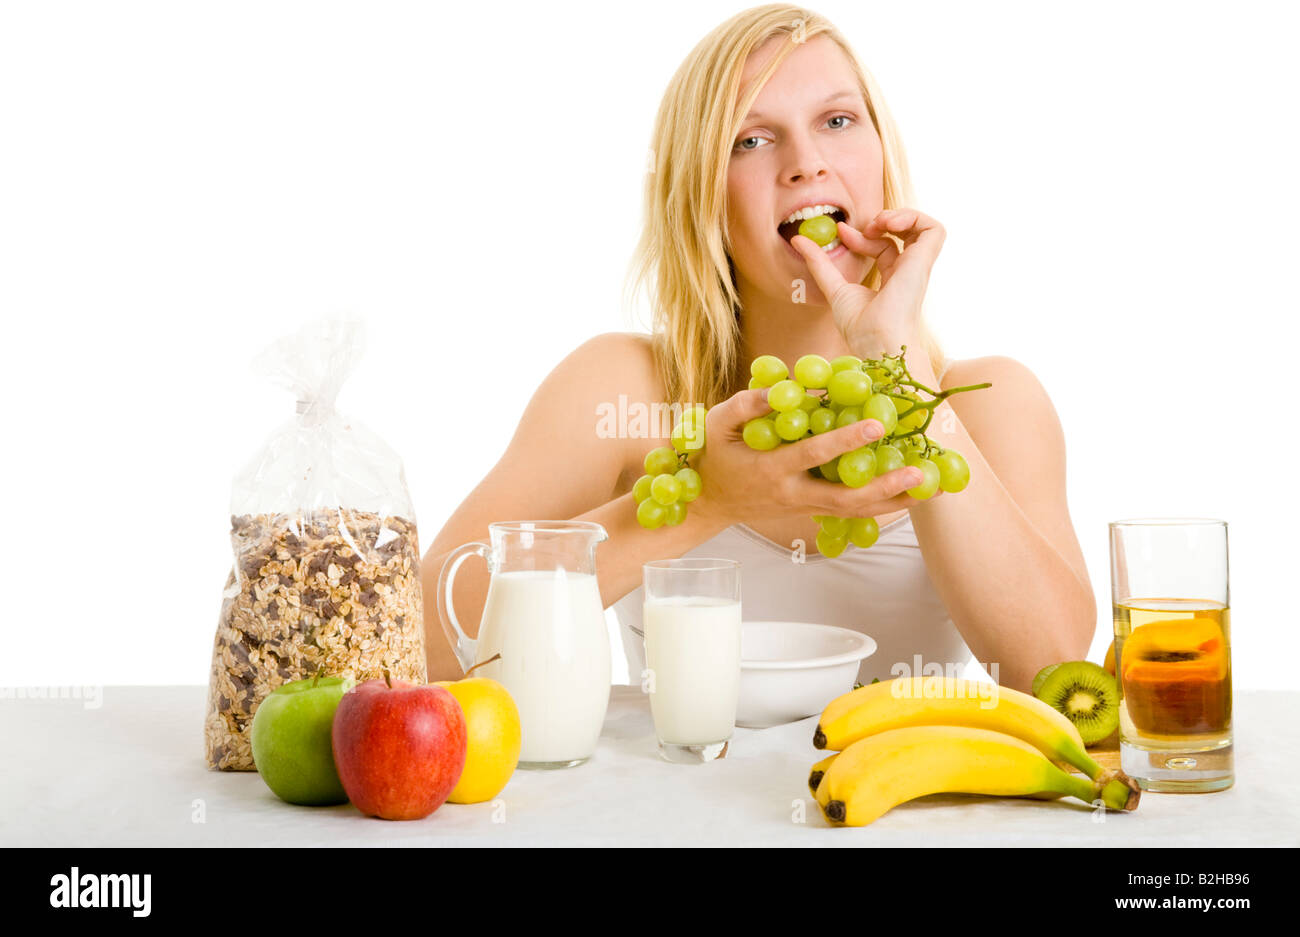 young blond woman breakfast fruits sound food morning bananas apples grapes body care wellness healthful eating Stock Photo